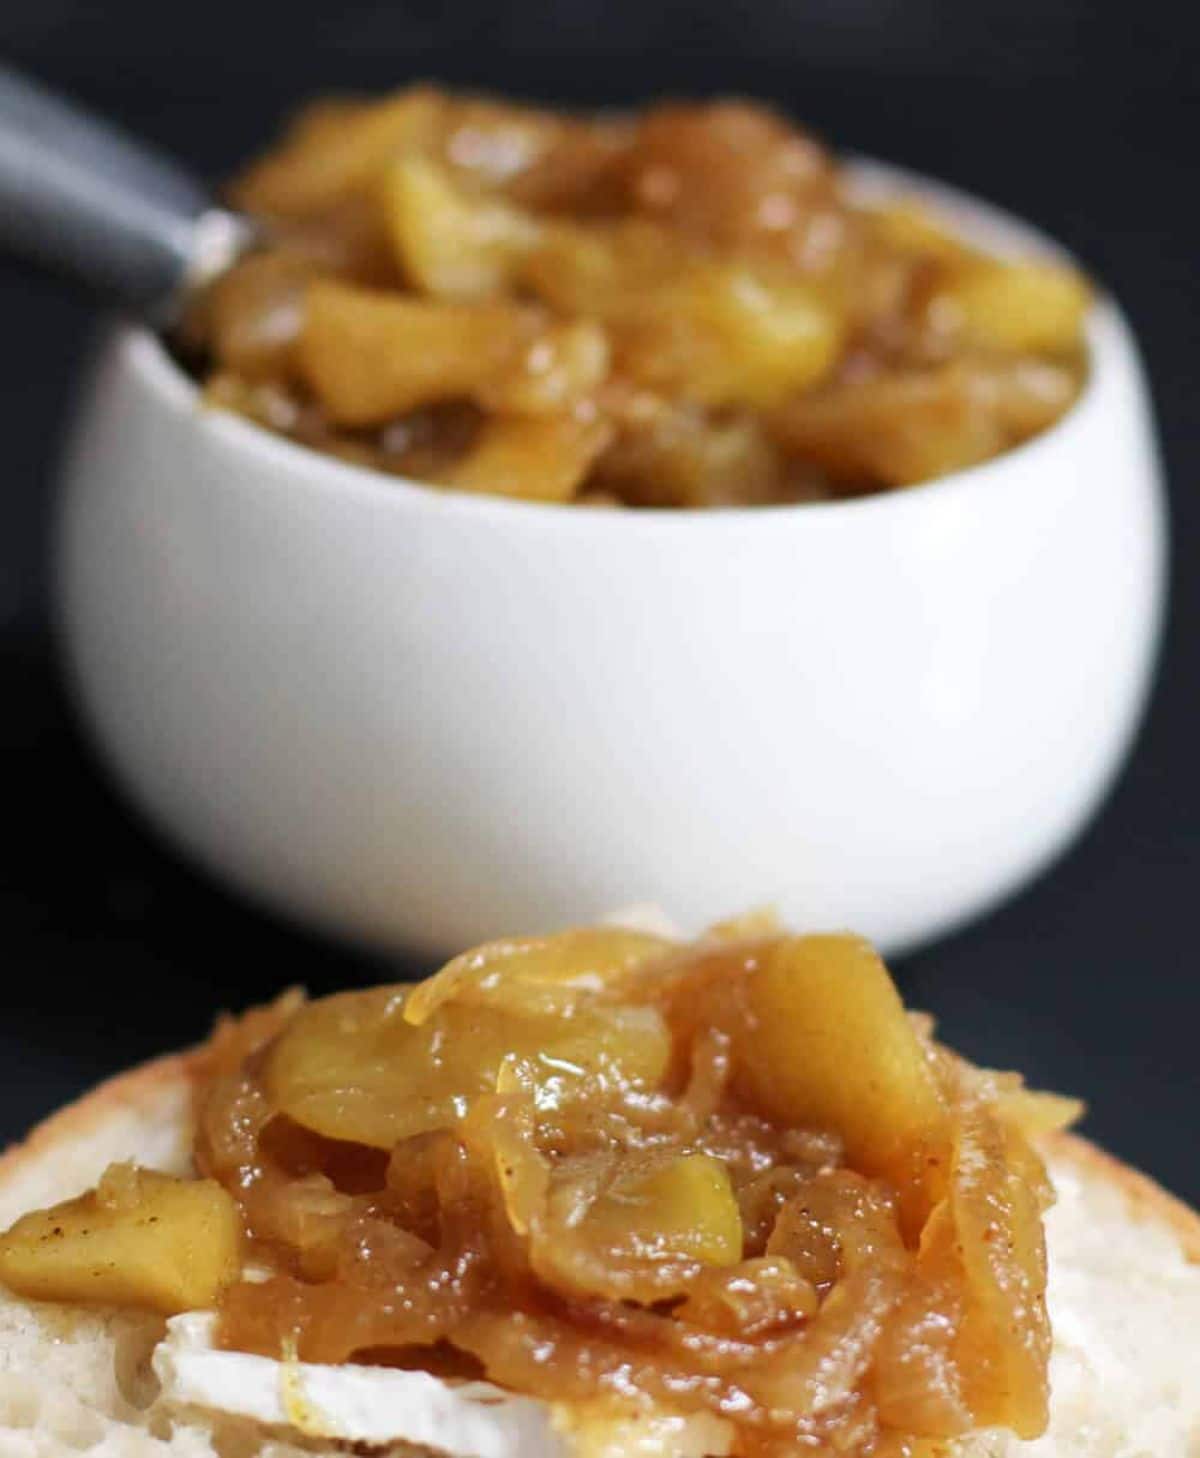 Apple and caramelized onion chutney on a piece of bread.